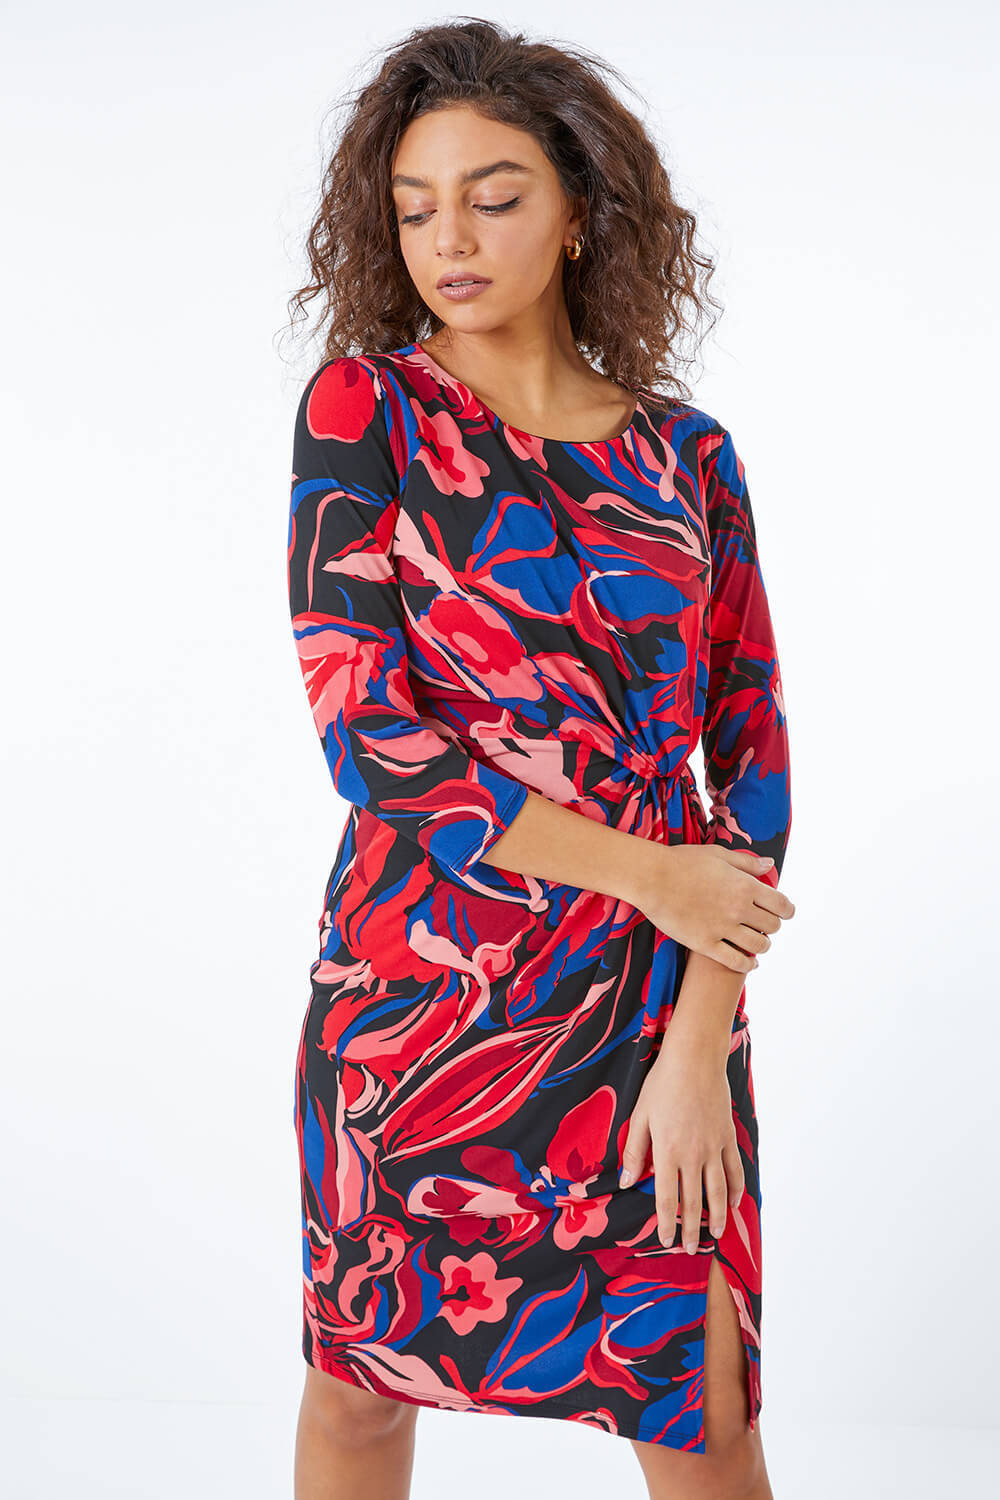 CORAL Petite Abstract Floral Side Knot Dress, Image 2 of 5